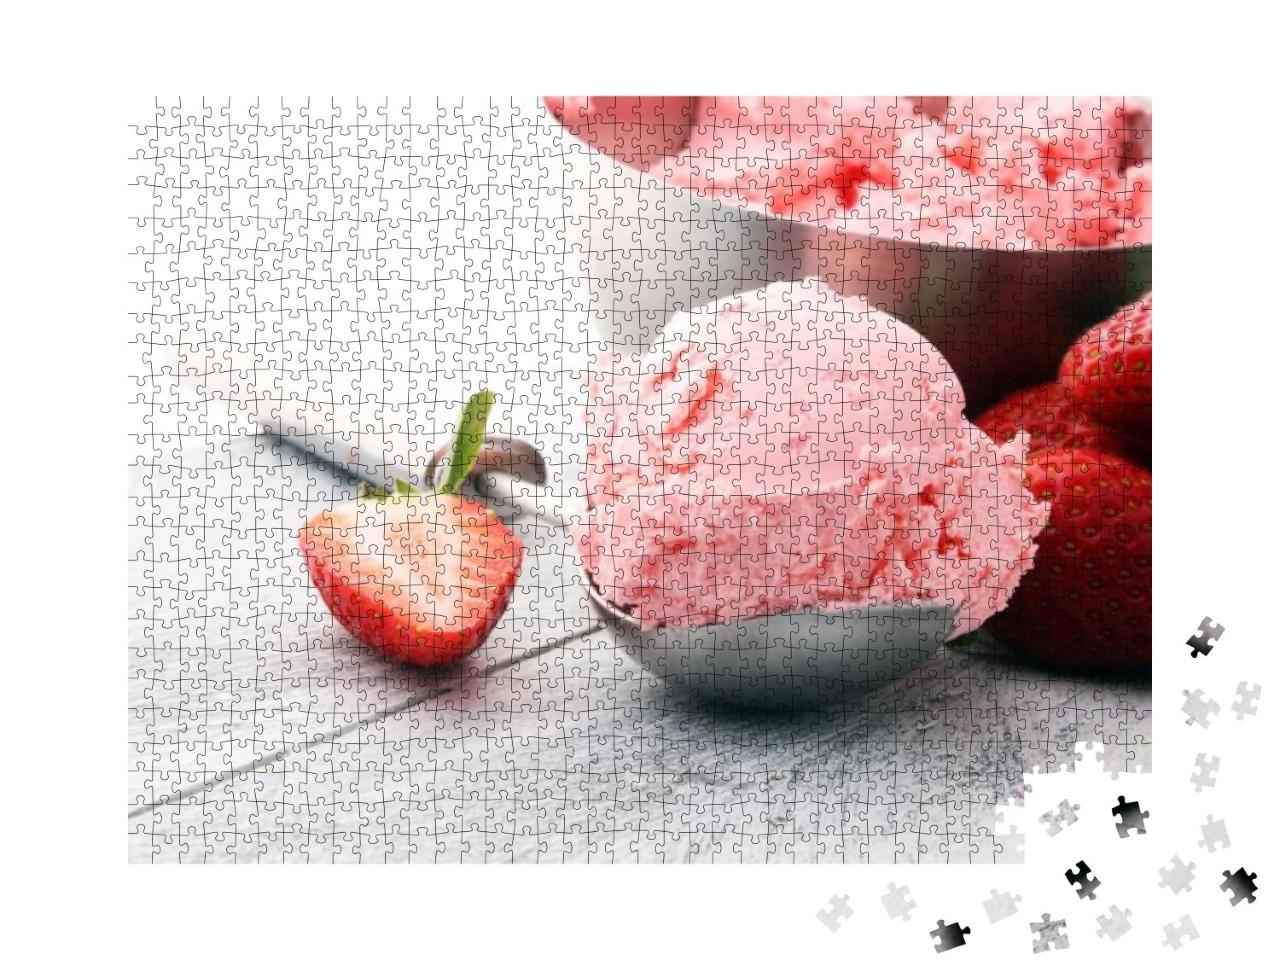 Delicious Strawberry Ice Cream Scoop with Fresh Strawberr... Jigsaw Puzzle with 1000 pieces